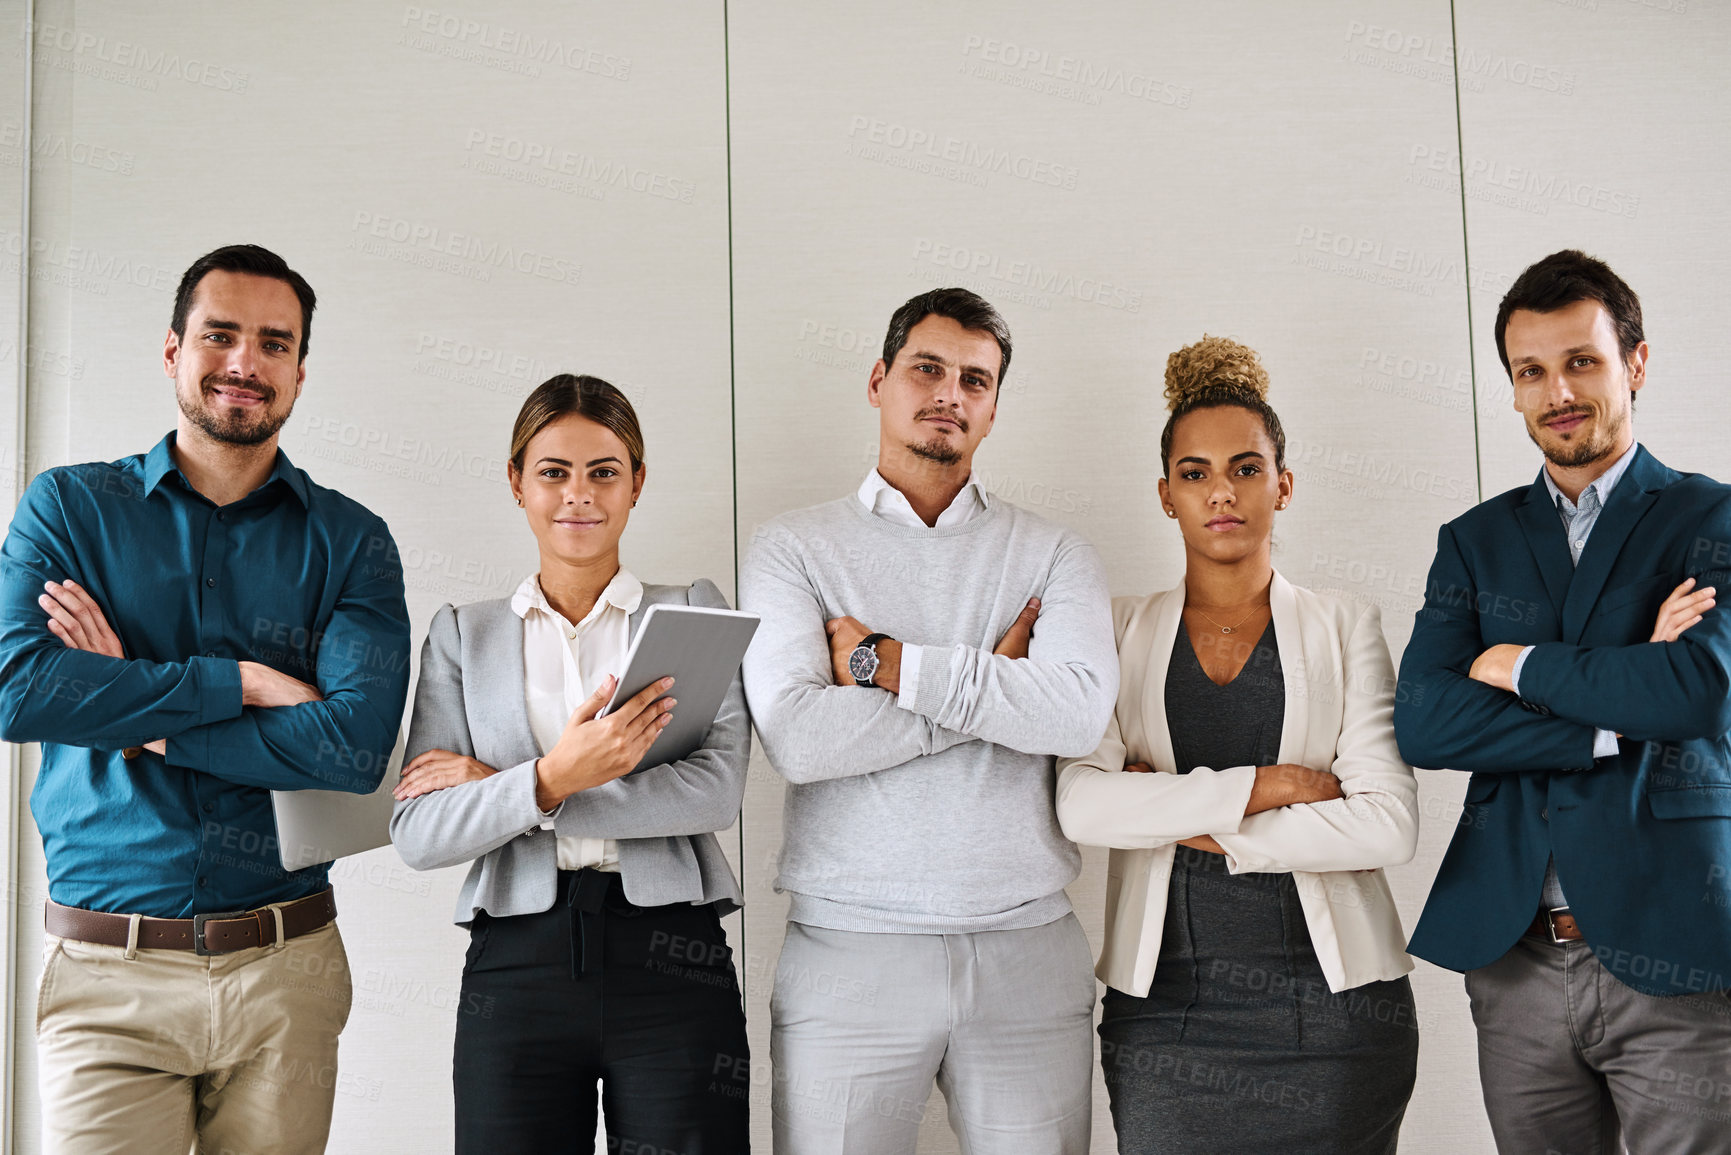 Buy stock photo Portrait of a group of businesspeople standing in an office